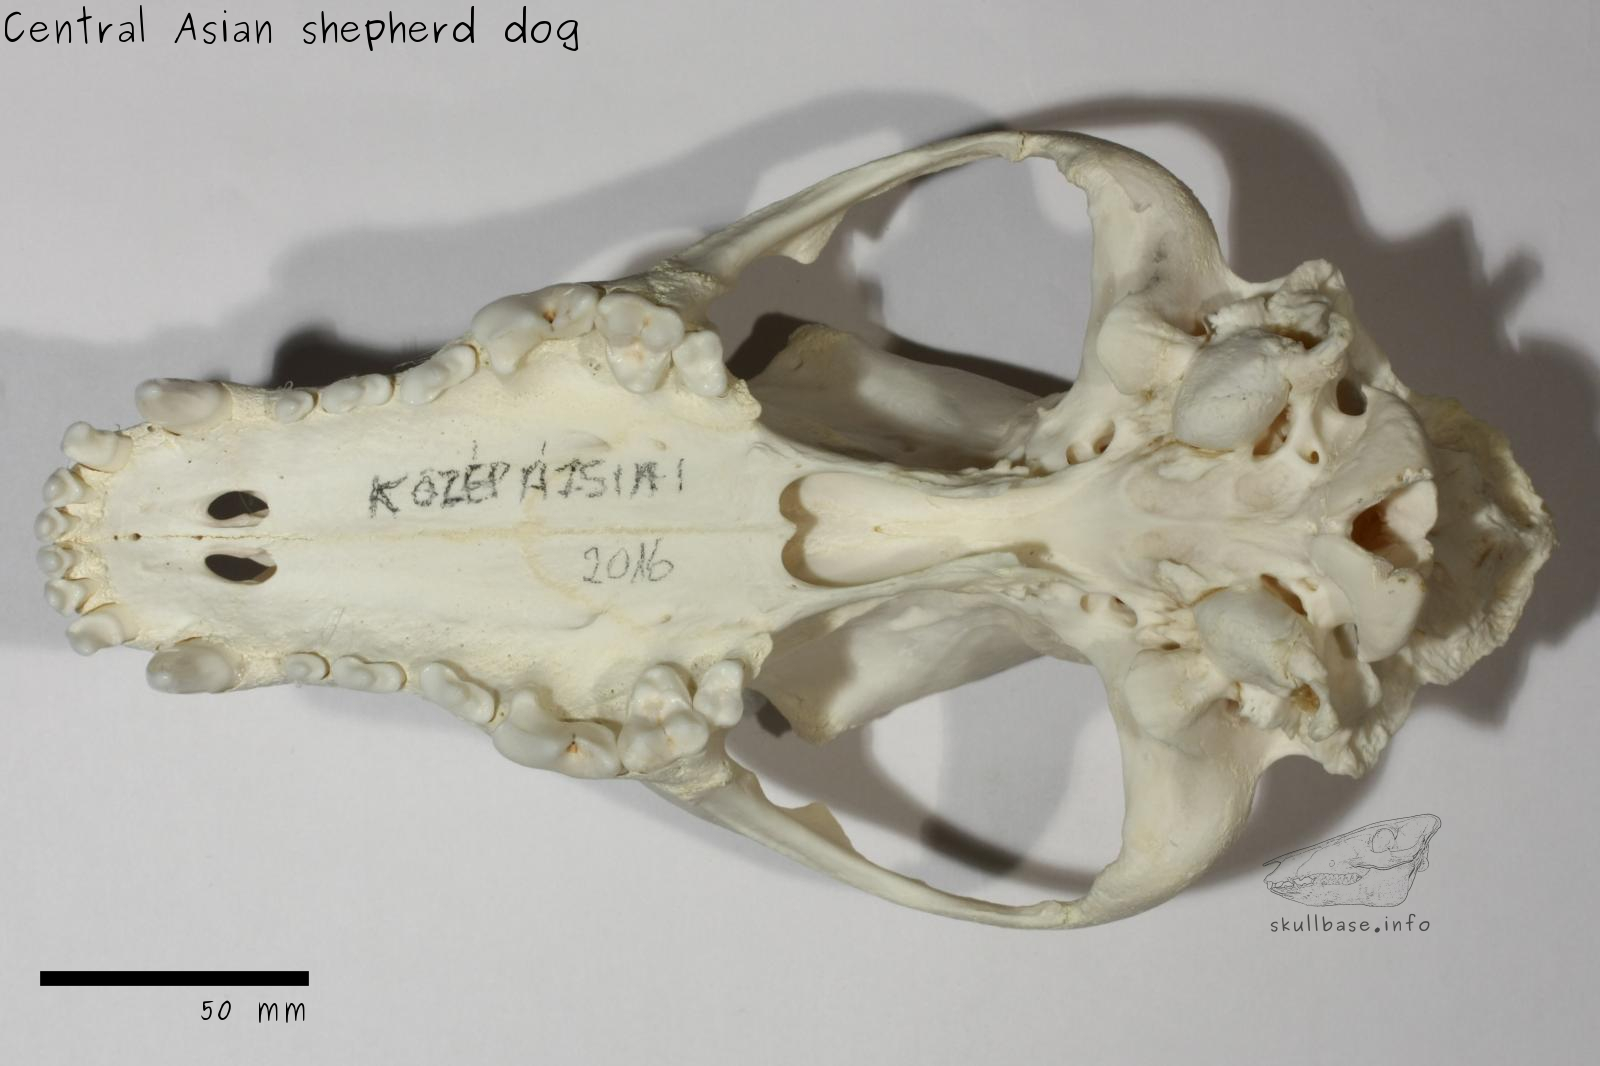 Central Asian shepherd dog (Canis lupus familiaris) skull ventral view